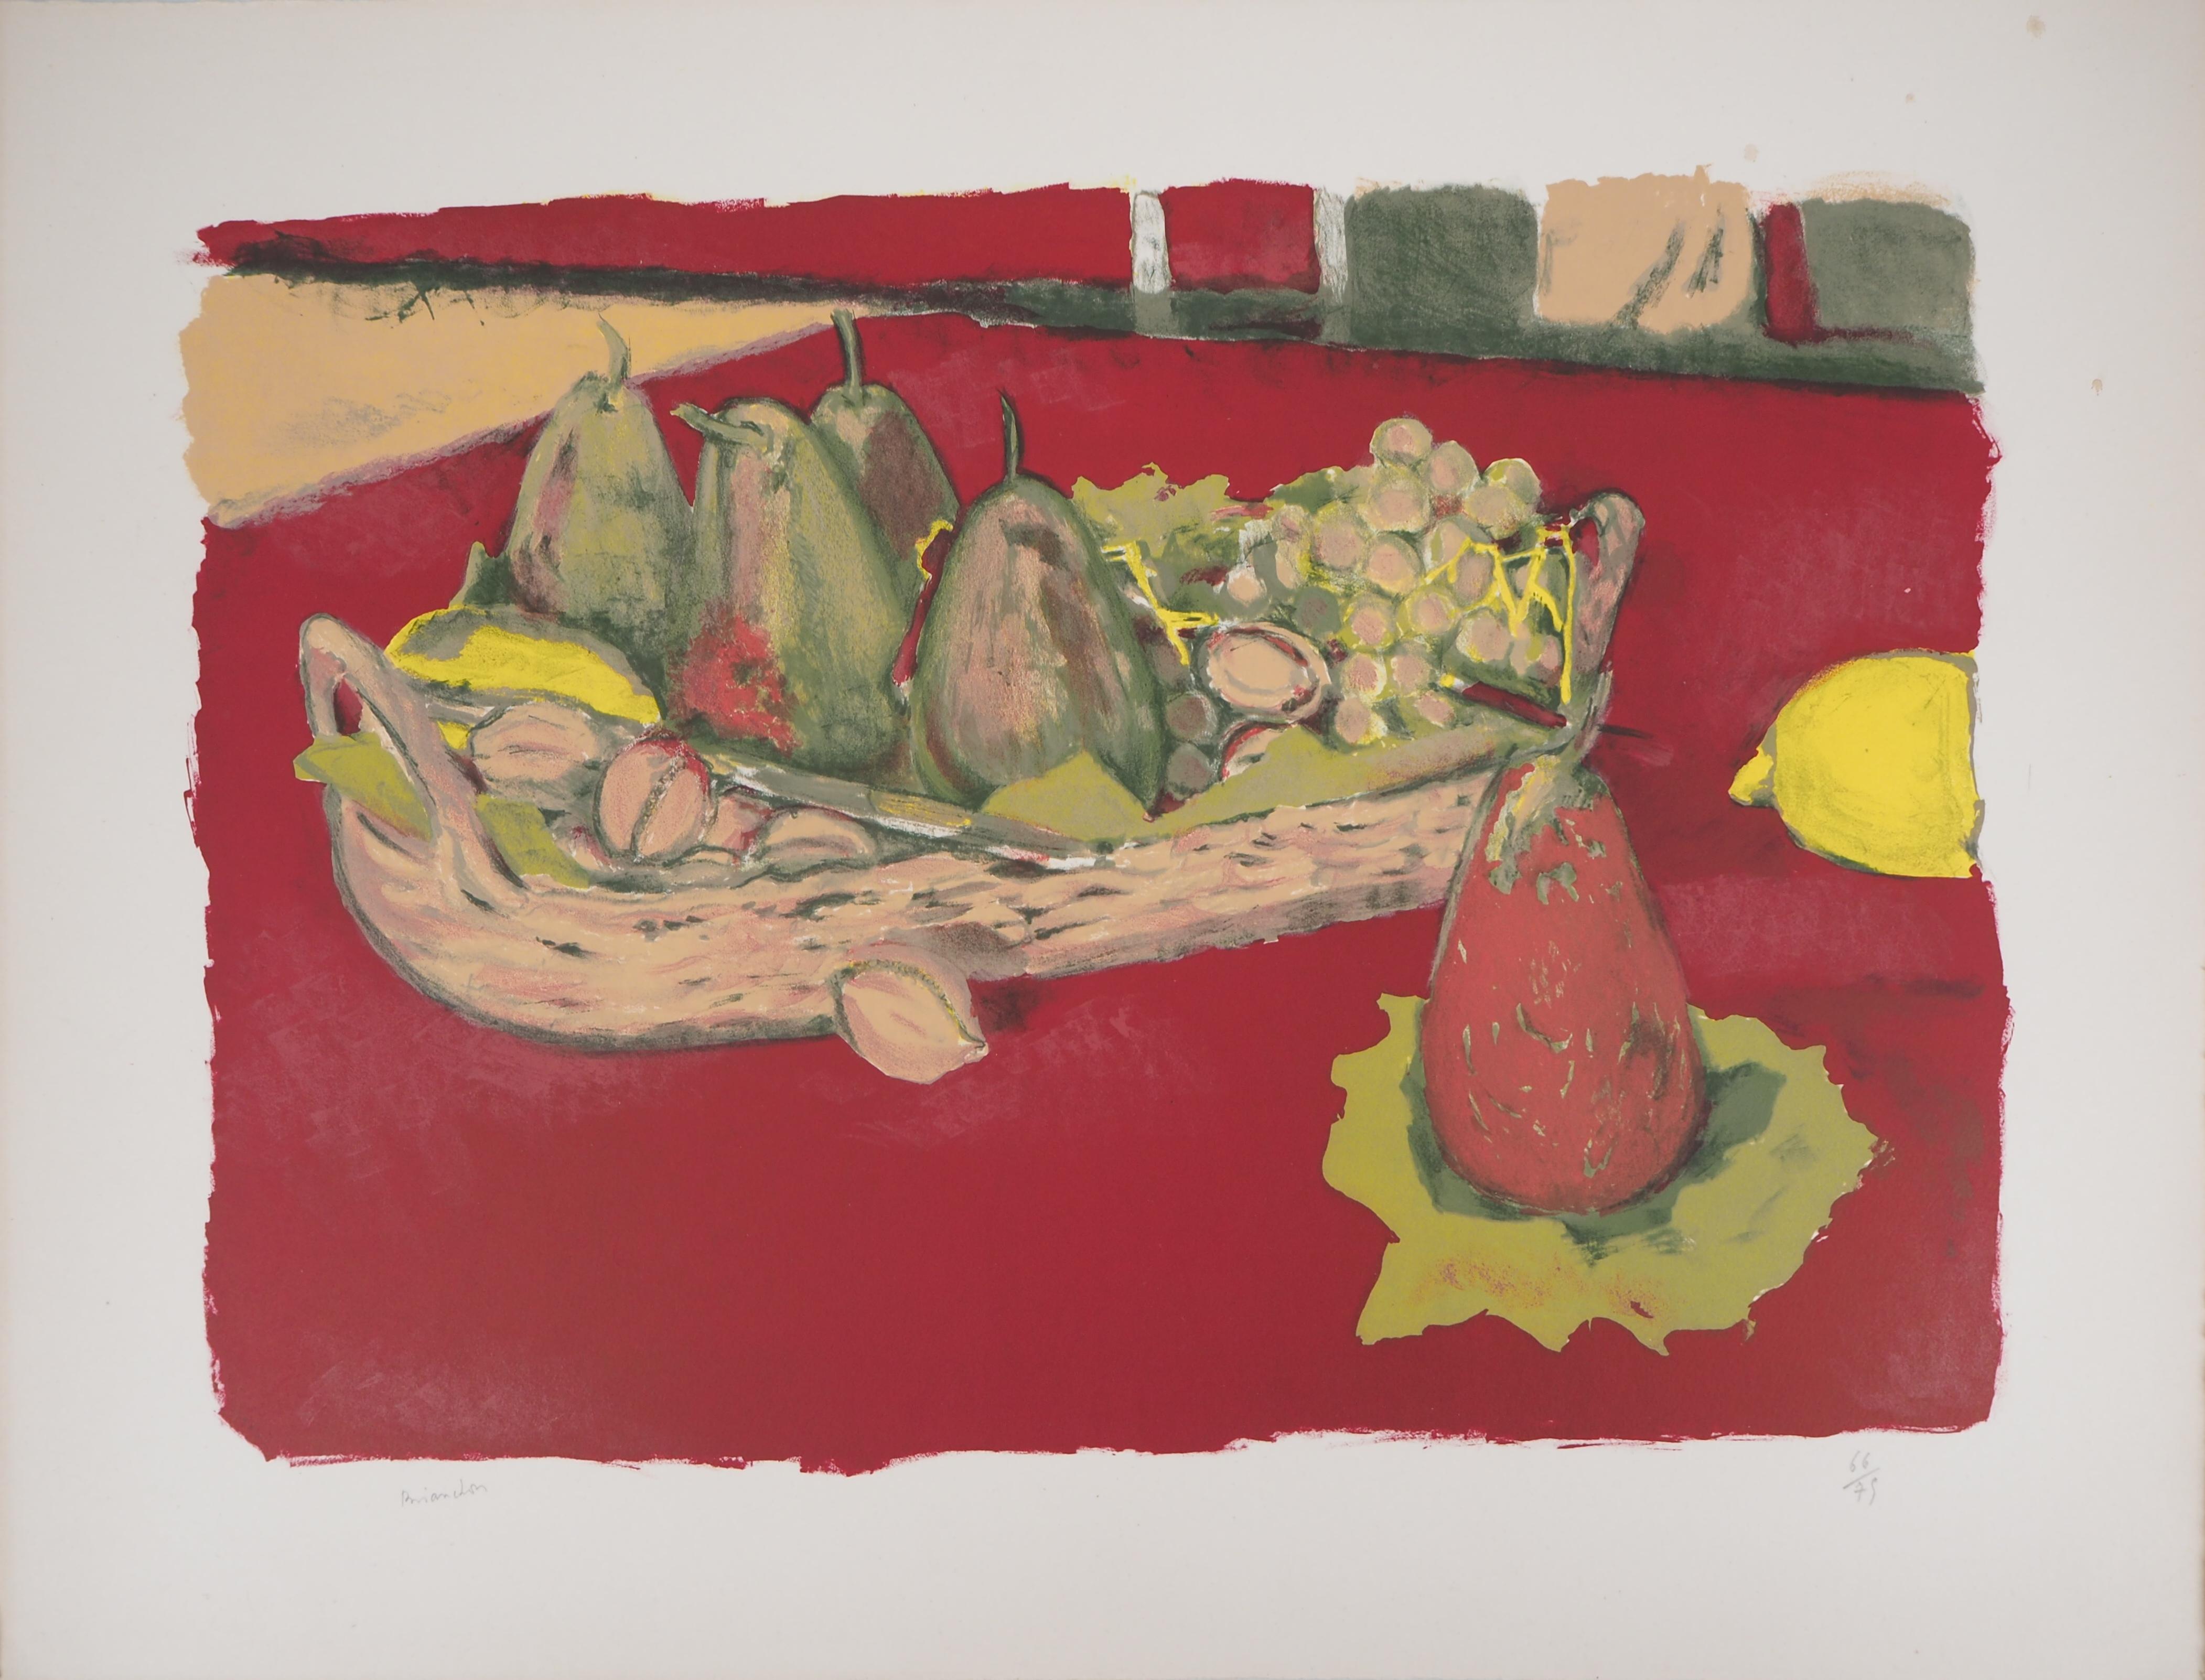 Still Life with Pears and Grappes - Original lithograph, Handsigned